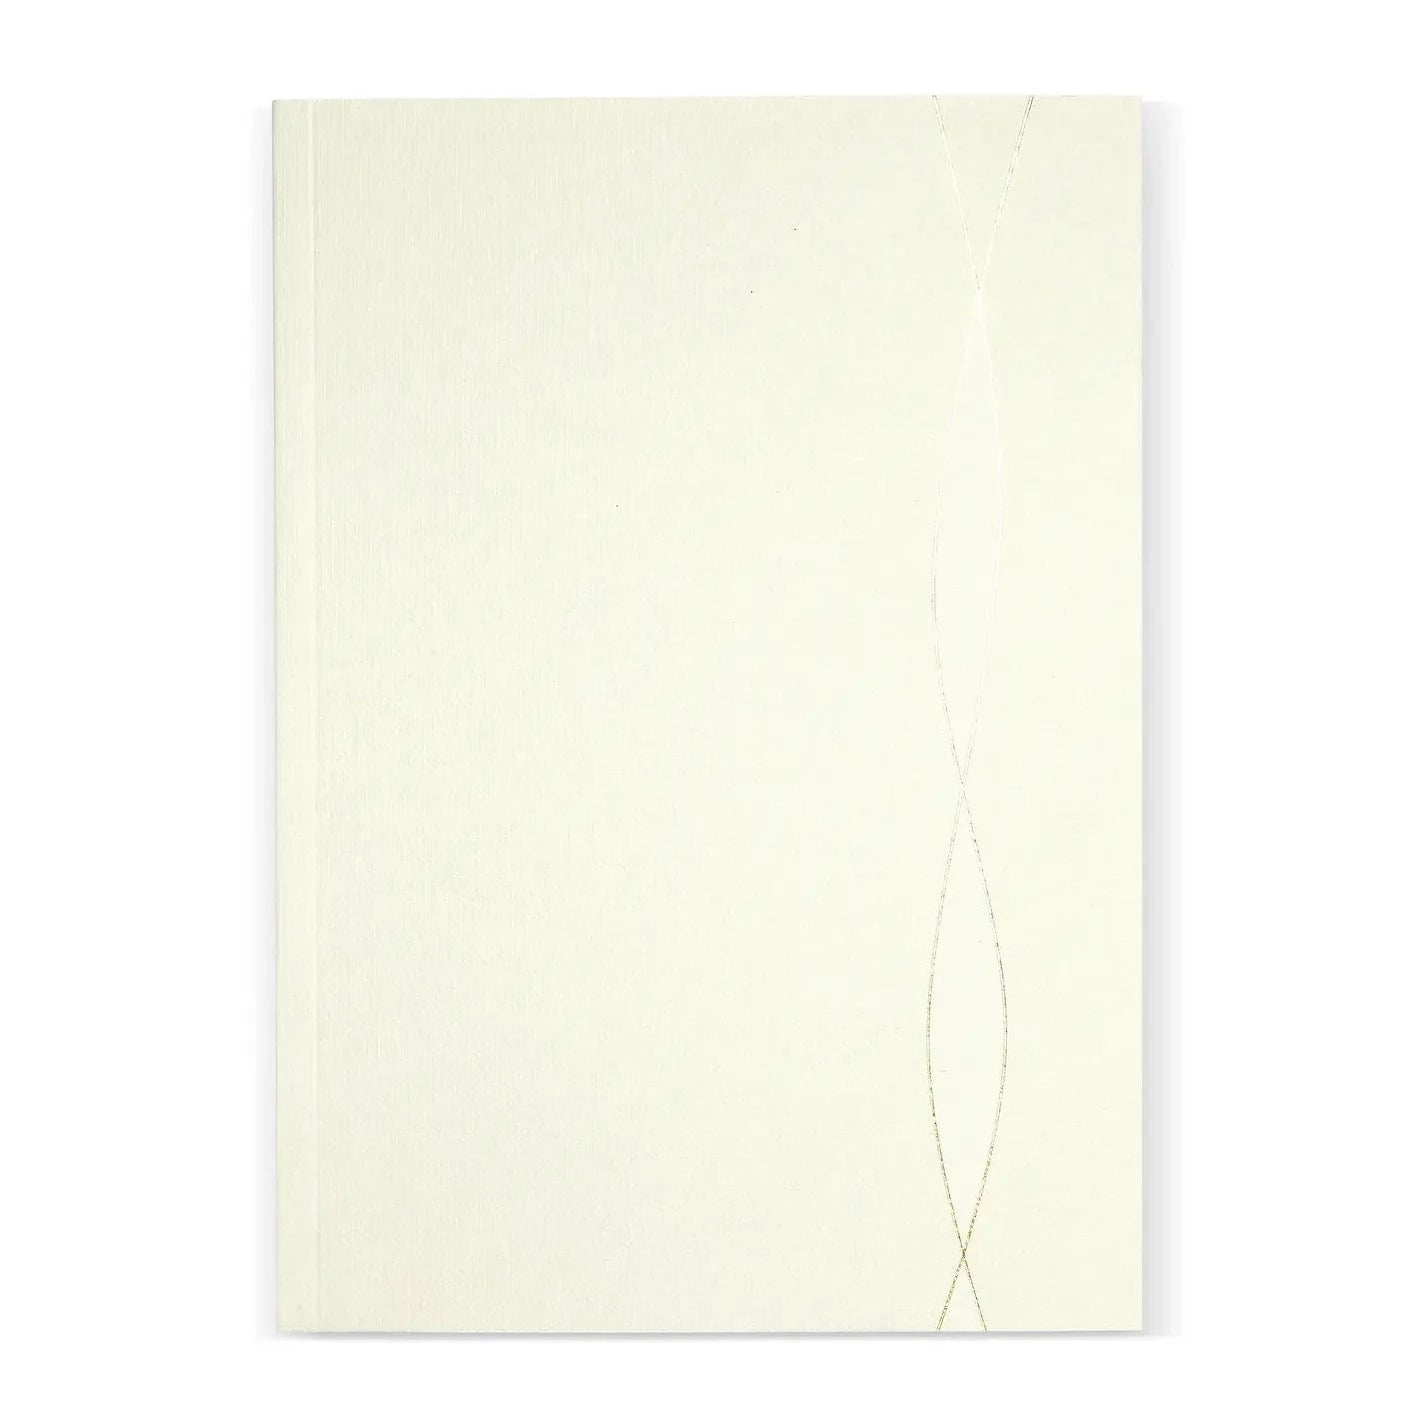 A5 Lined Notebook - mist